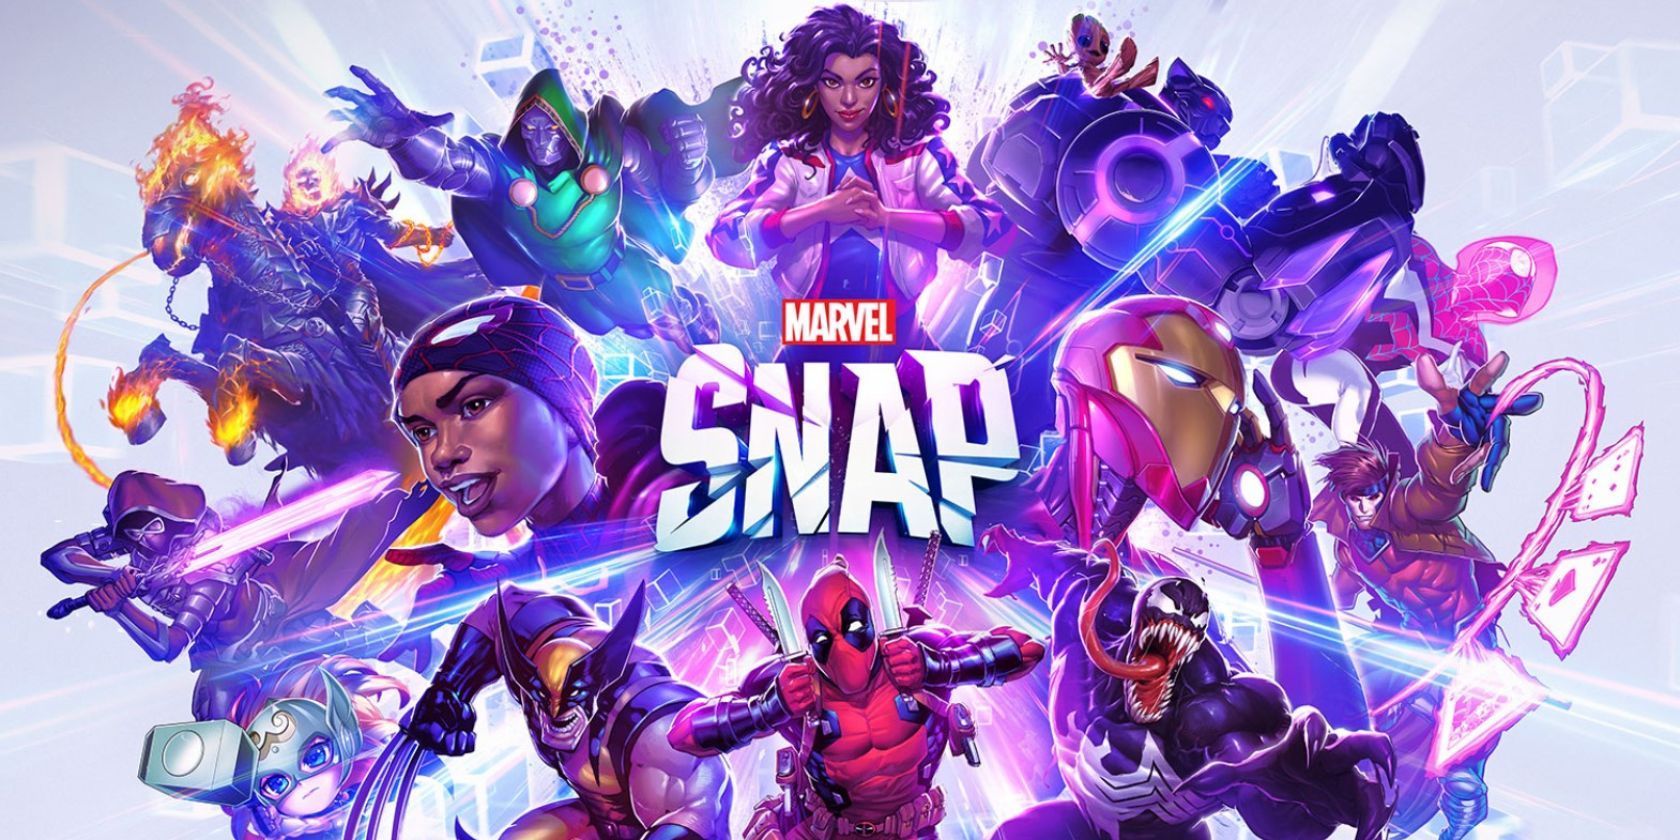 Family Guide to Marvel Snap (Age Rating PEGI 12)